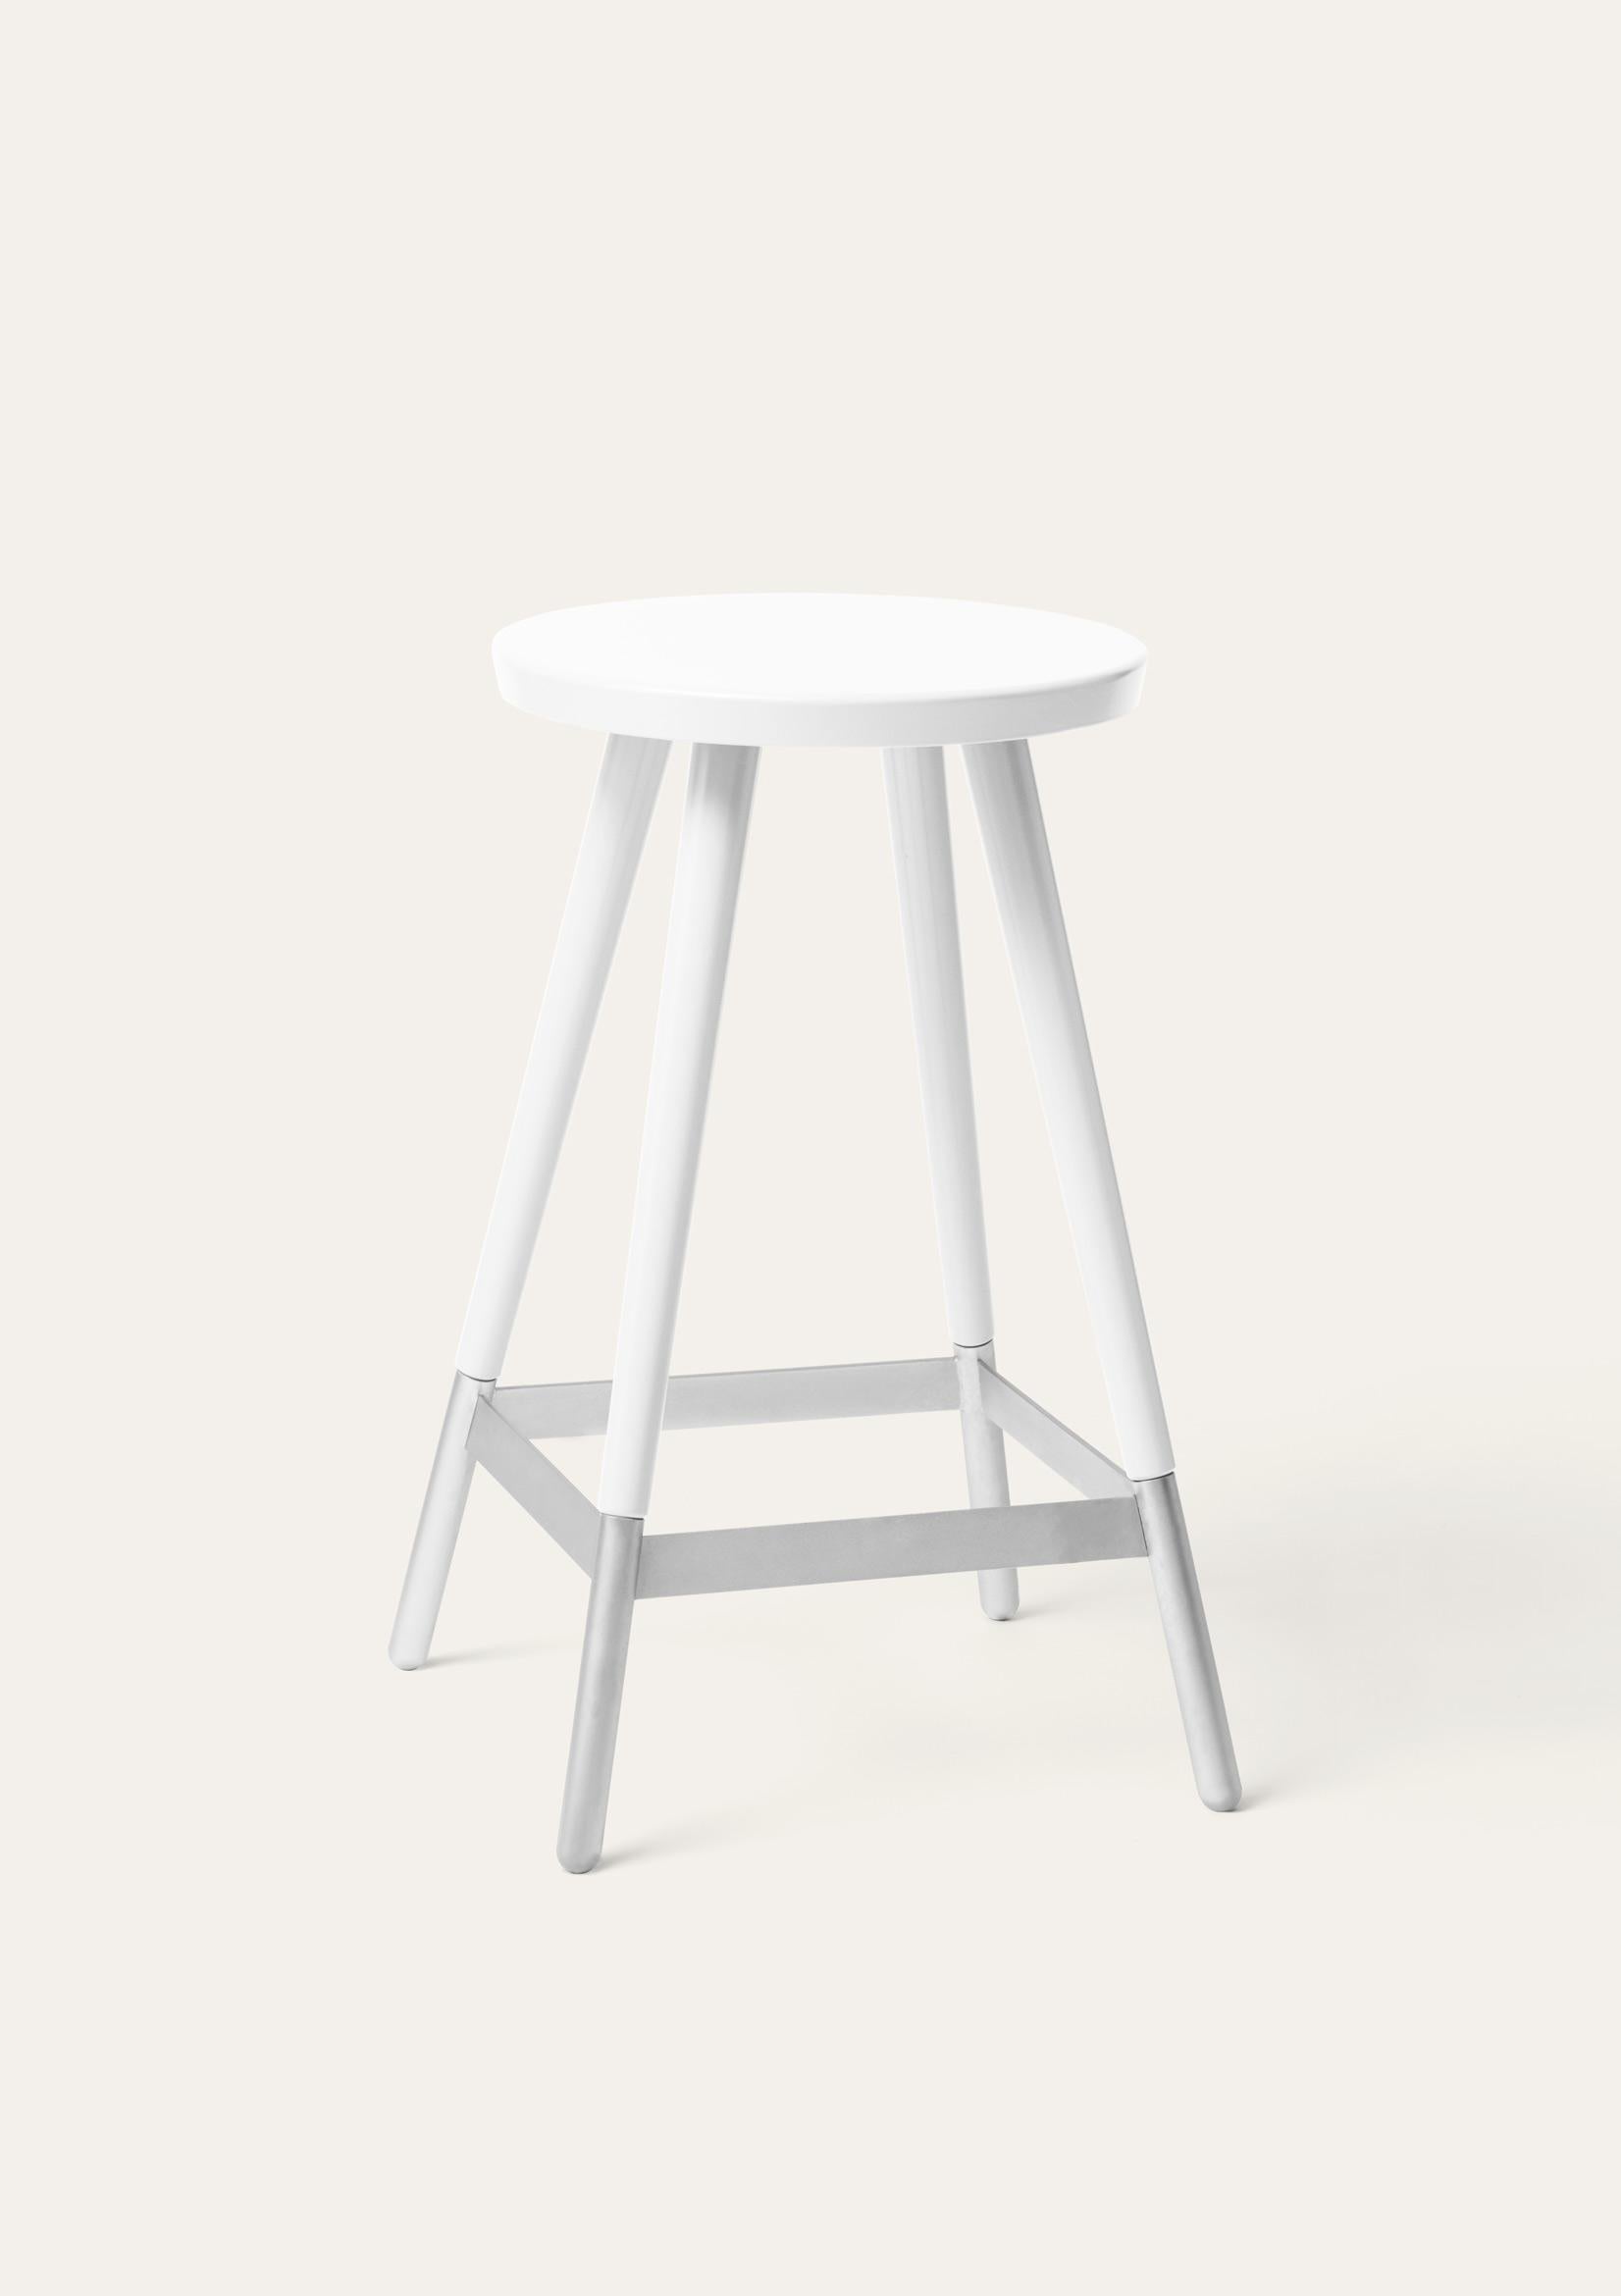 White Tupp stool by Storängen Design
Dimensions: D 41 x W 41 x H 65 cm
Materials: birch wood, nickel plated steel.
Also available in other colors and with backrest.

Give the bar some character! Tupp is avaliable in two heights, both with and